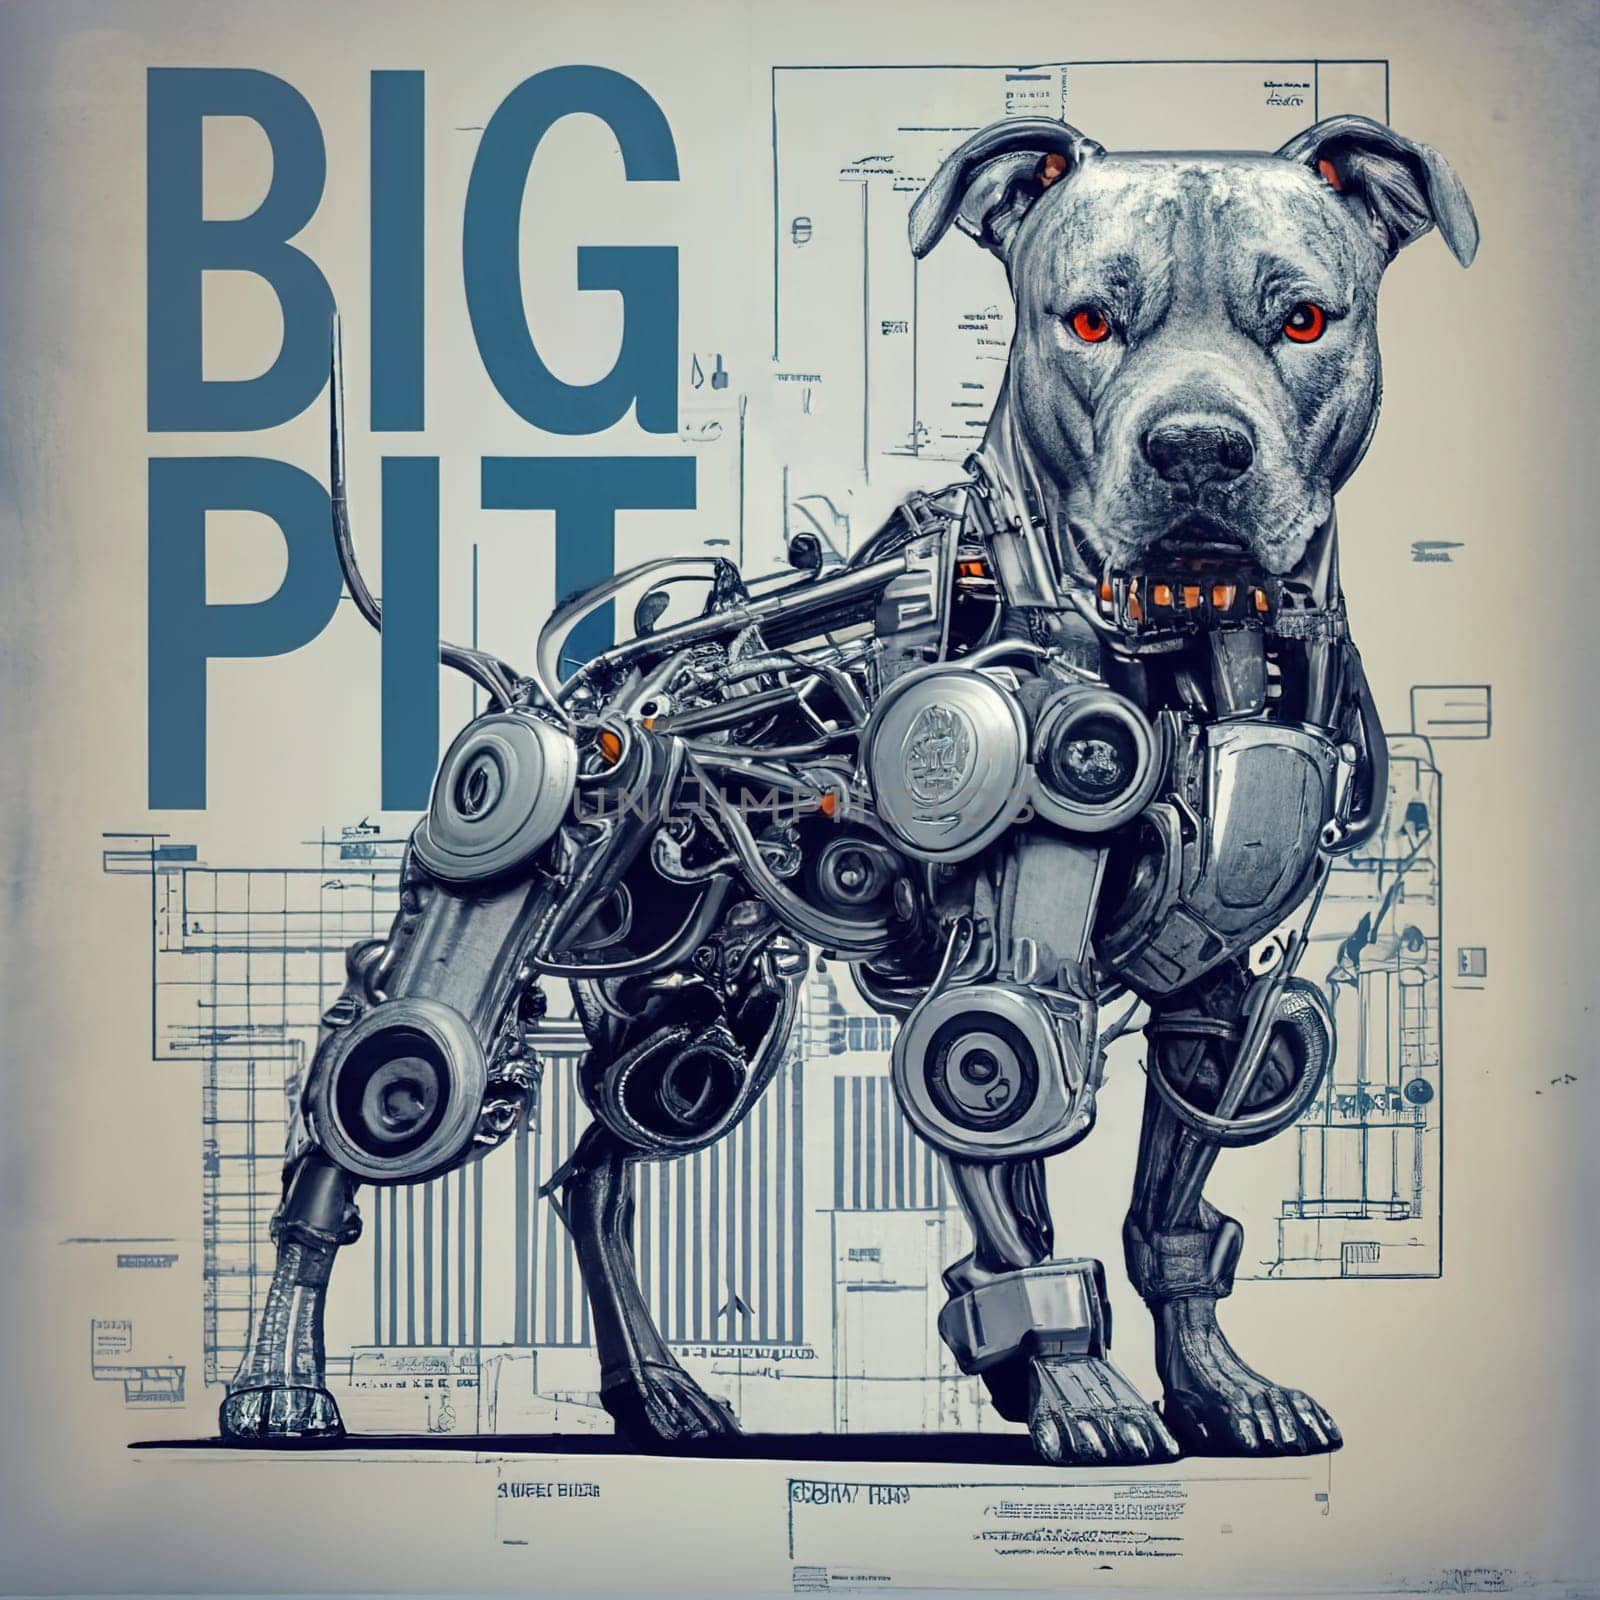 poster of a mechanical pitbull, technical schematics download image